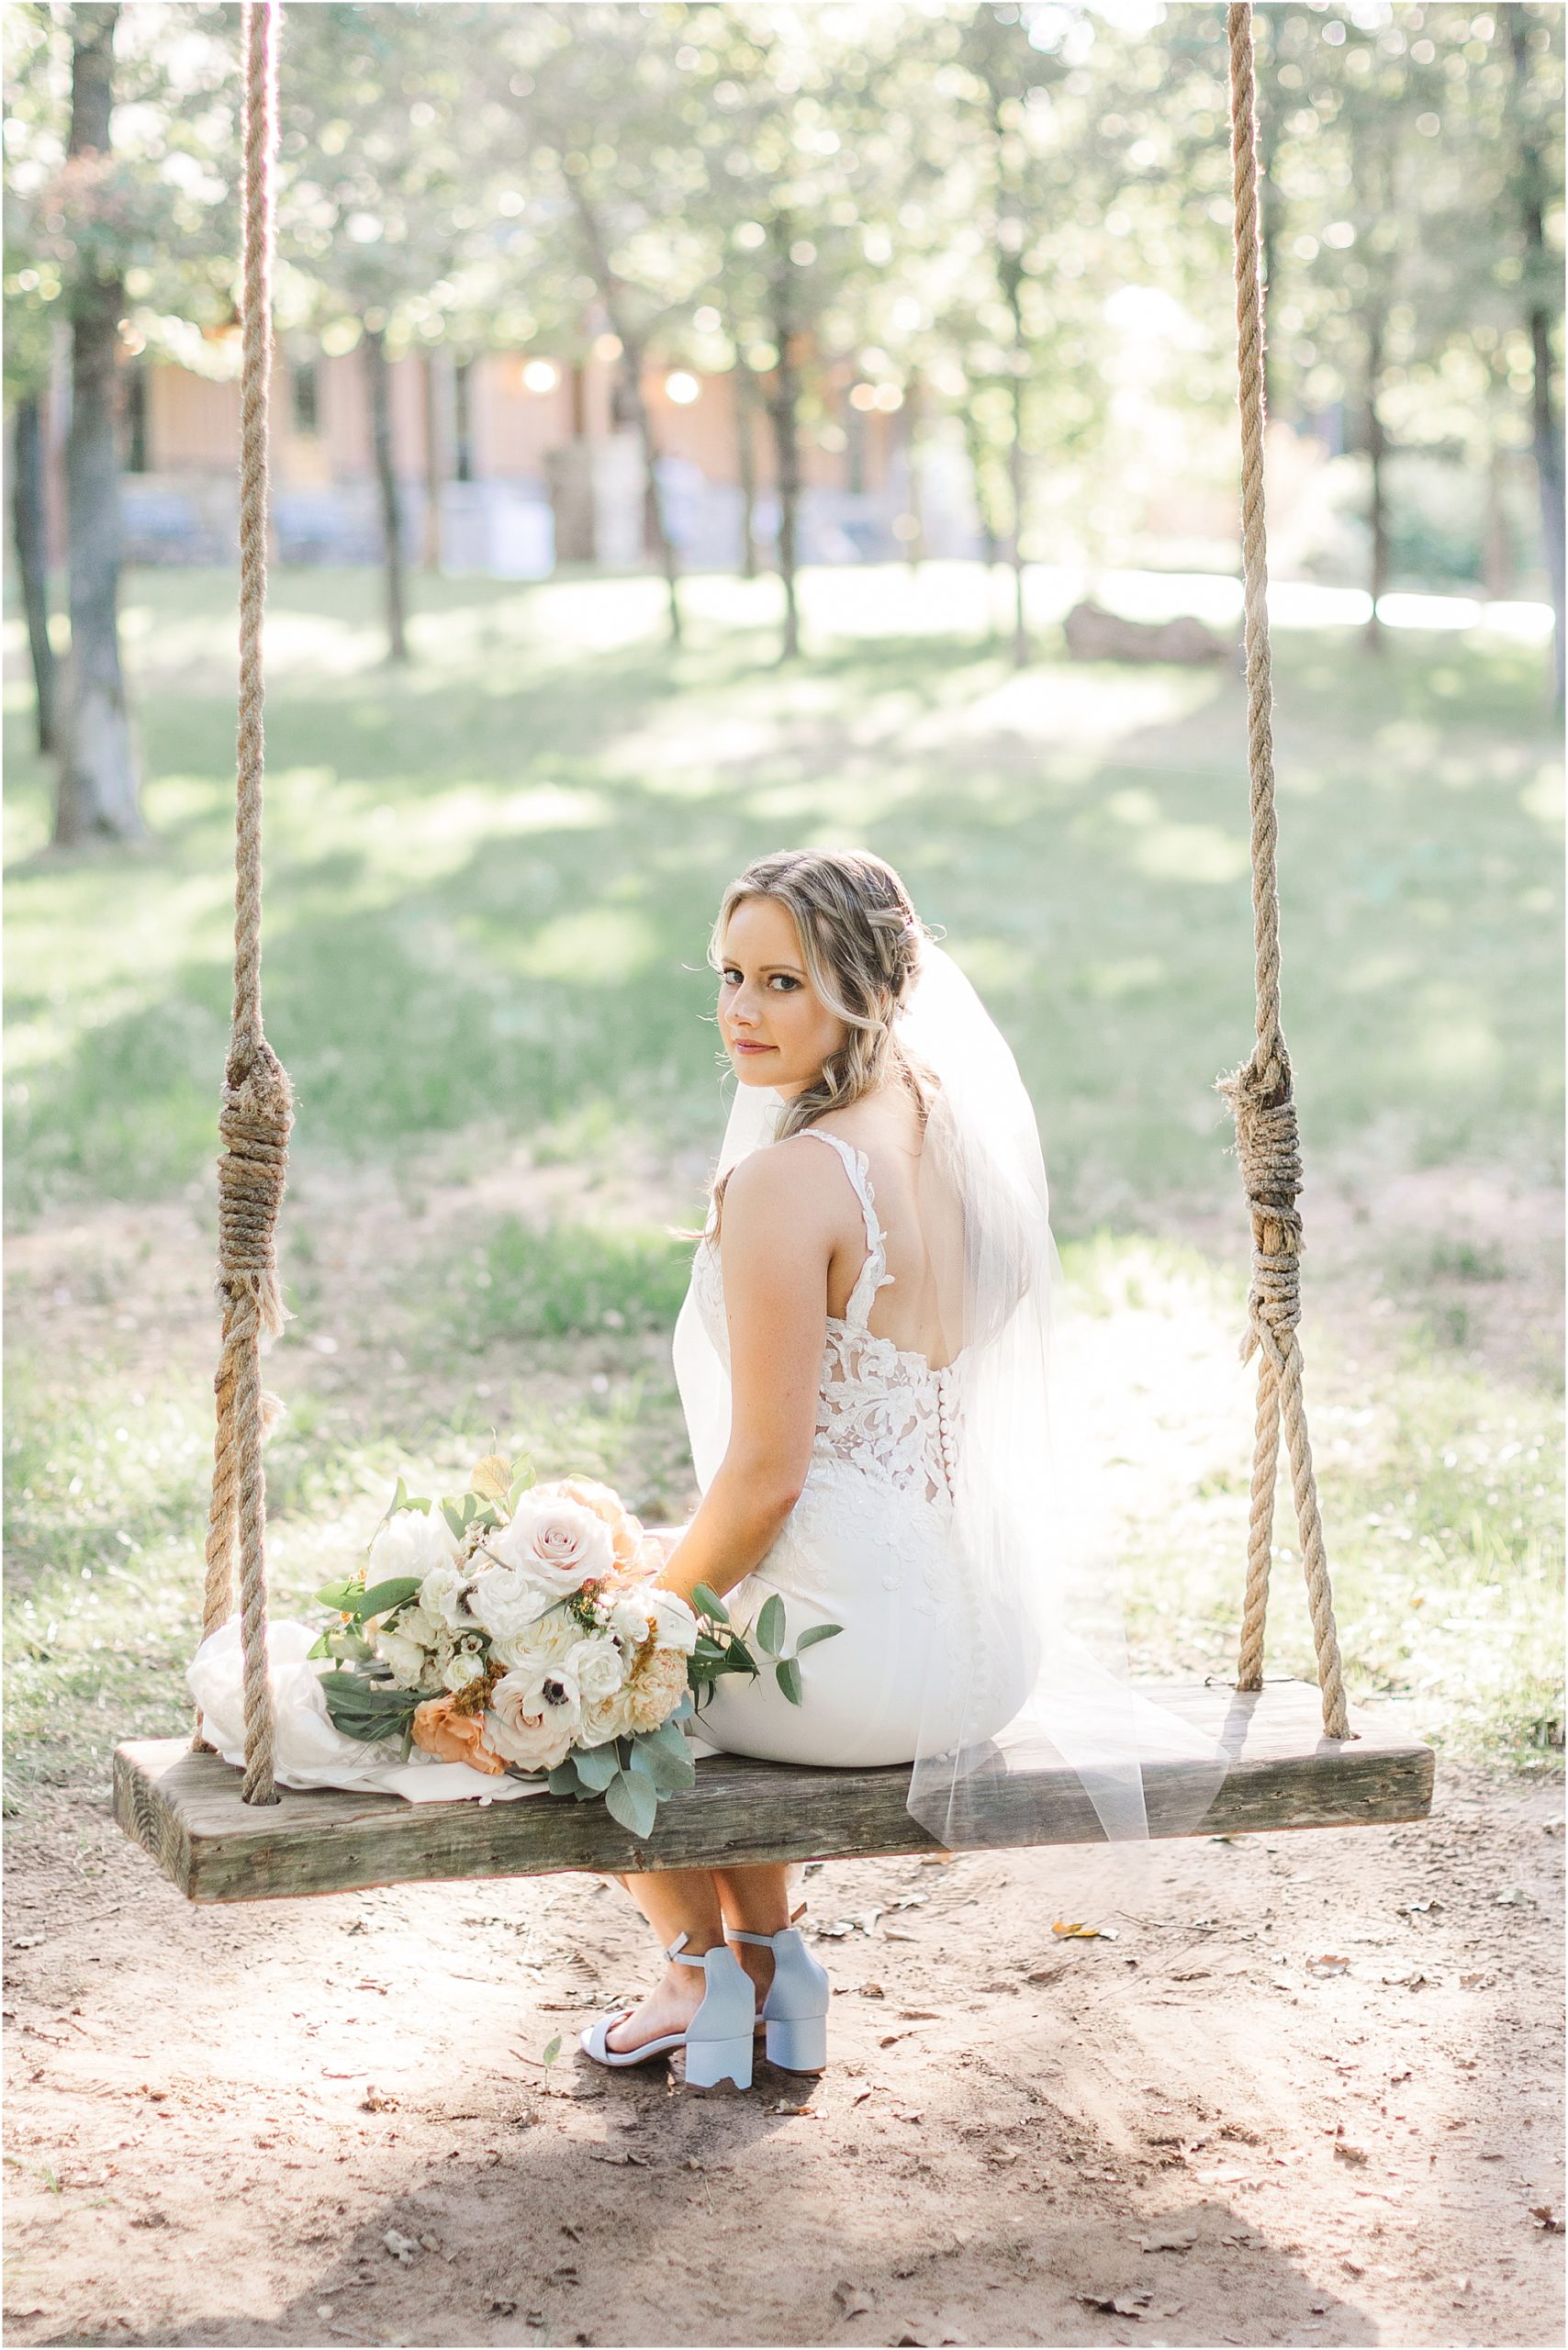 The bride swinging in the woods on her wedding day.